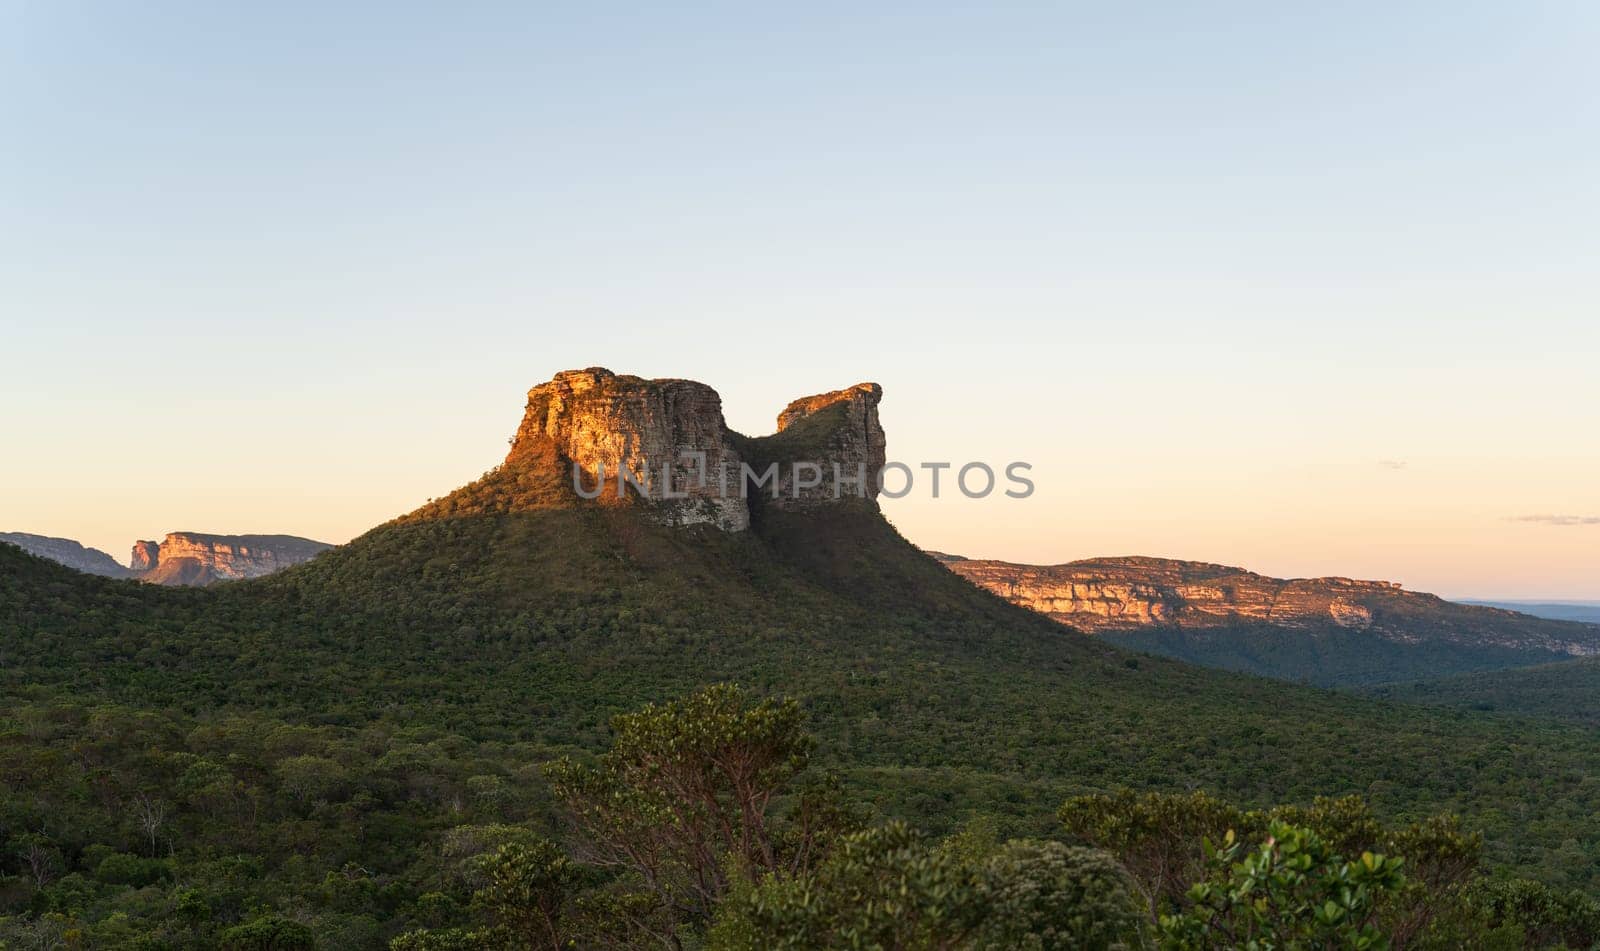 Breathtaking sunset at Chapada Diamantina, Brazil with a camel-shaped rock rising above a lush landscape under a clear sky. Ideal for text placement.